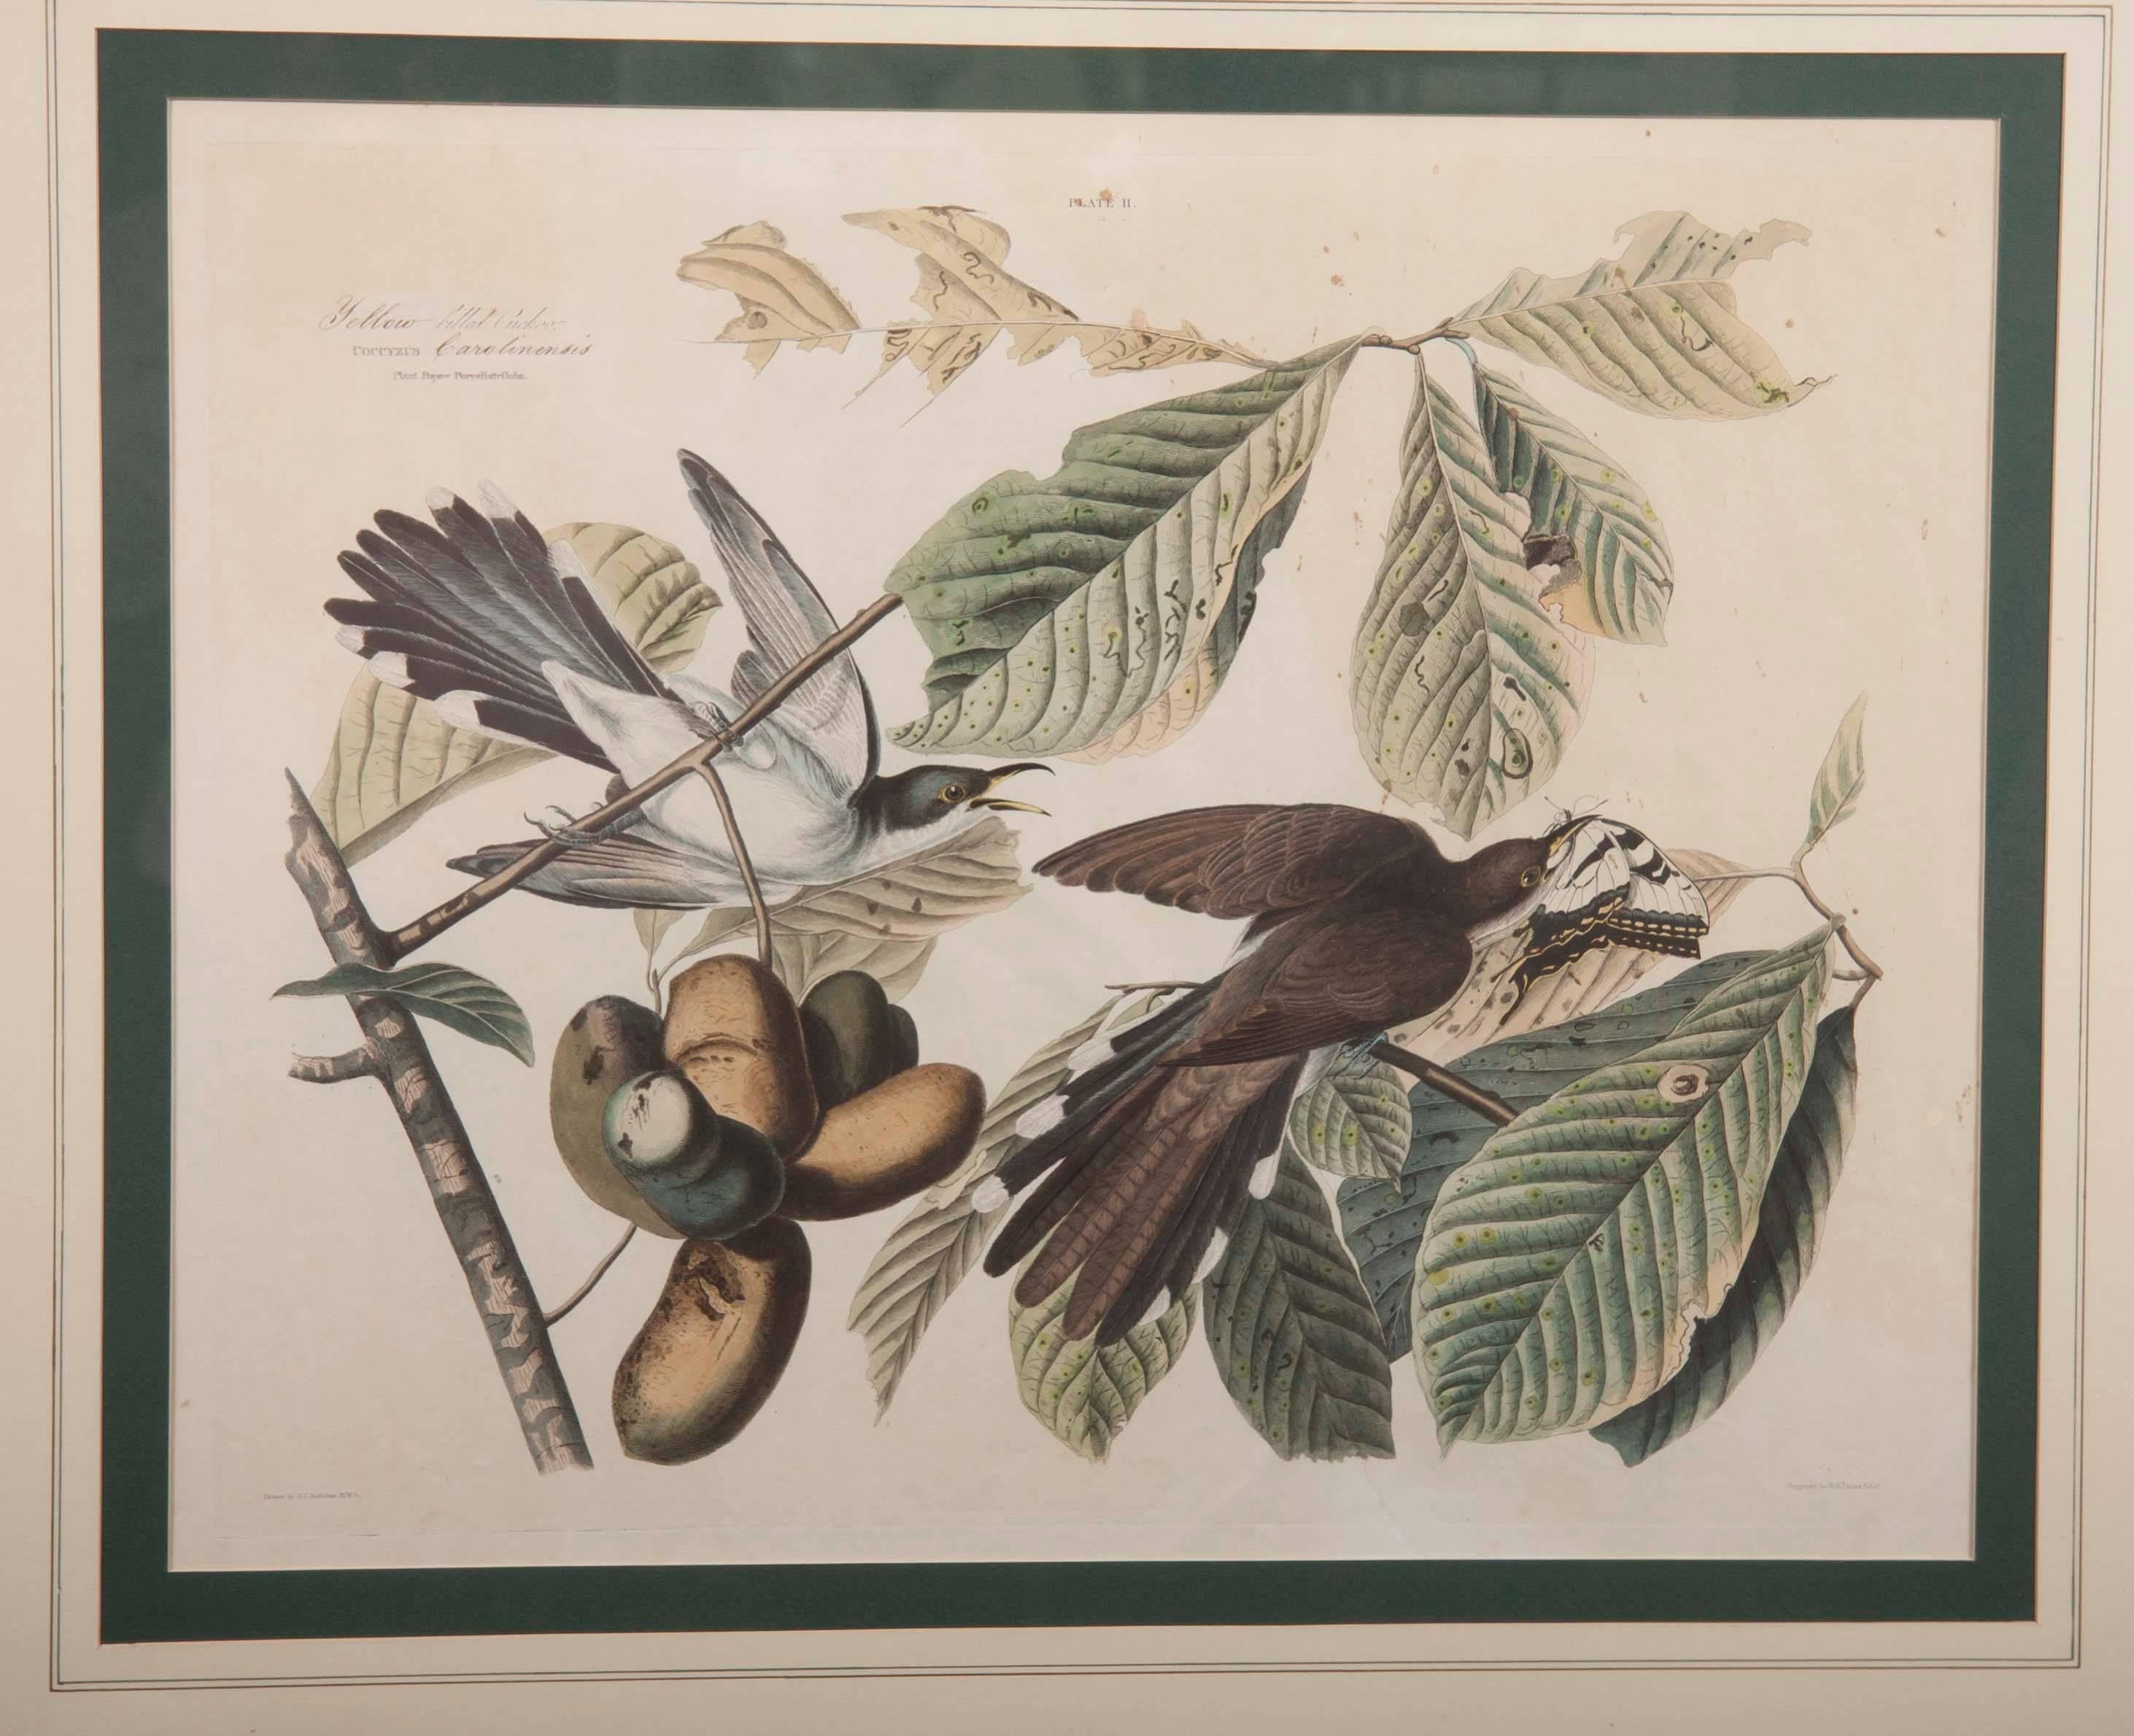 A rare original large folio size hand-colored etching, plate # 2 in Audubon's 